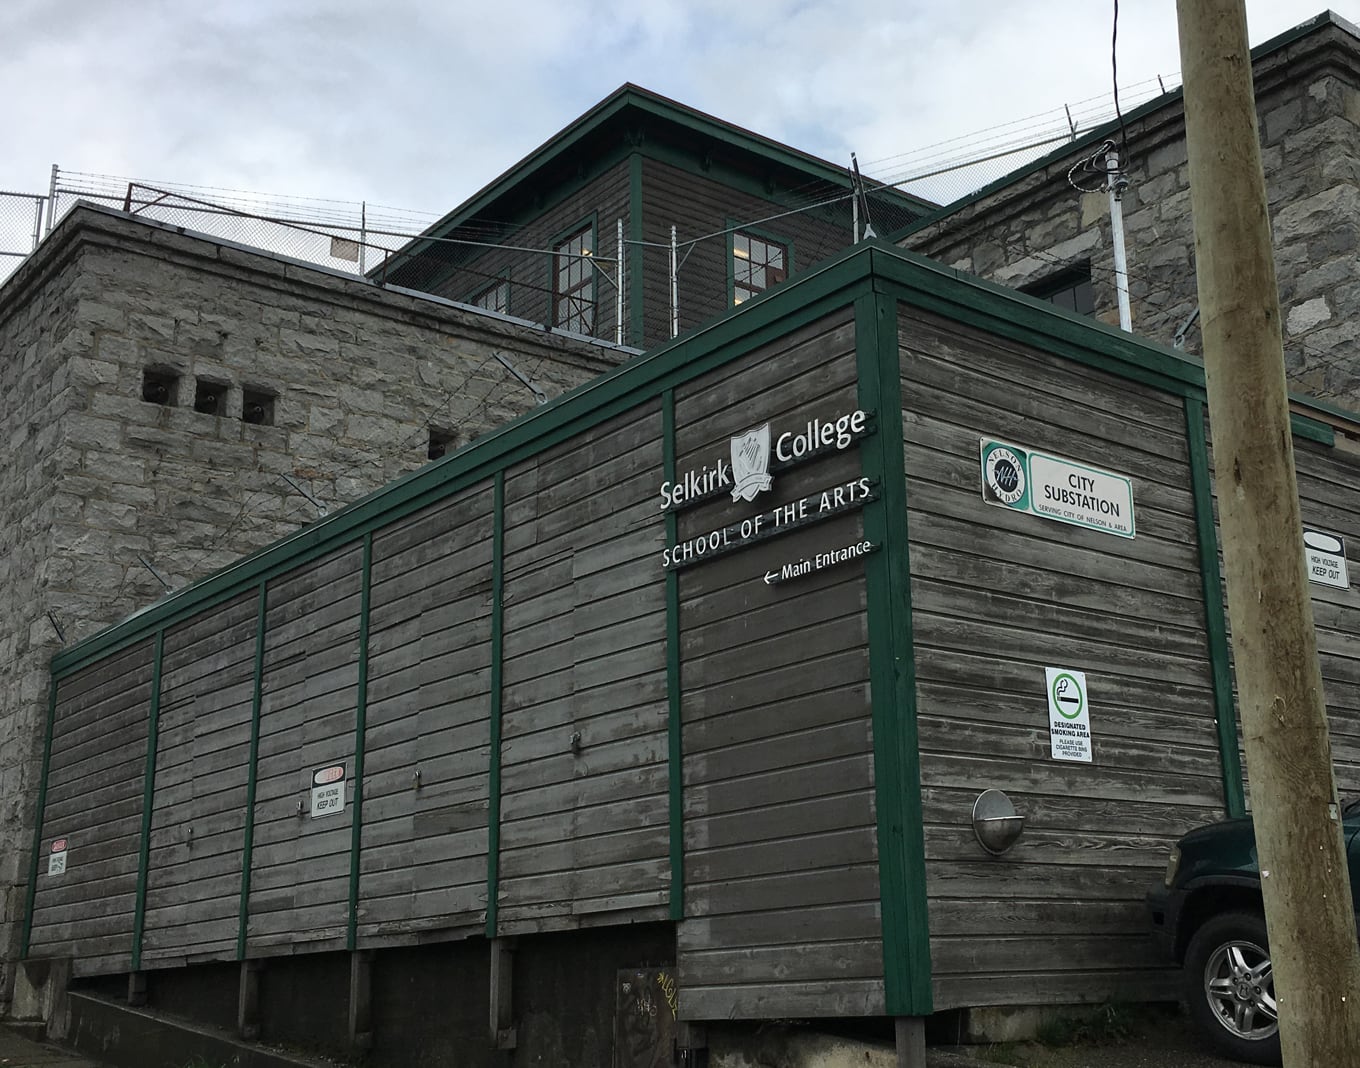 City substation handed back to the city after decades of hydro use